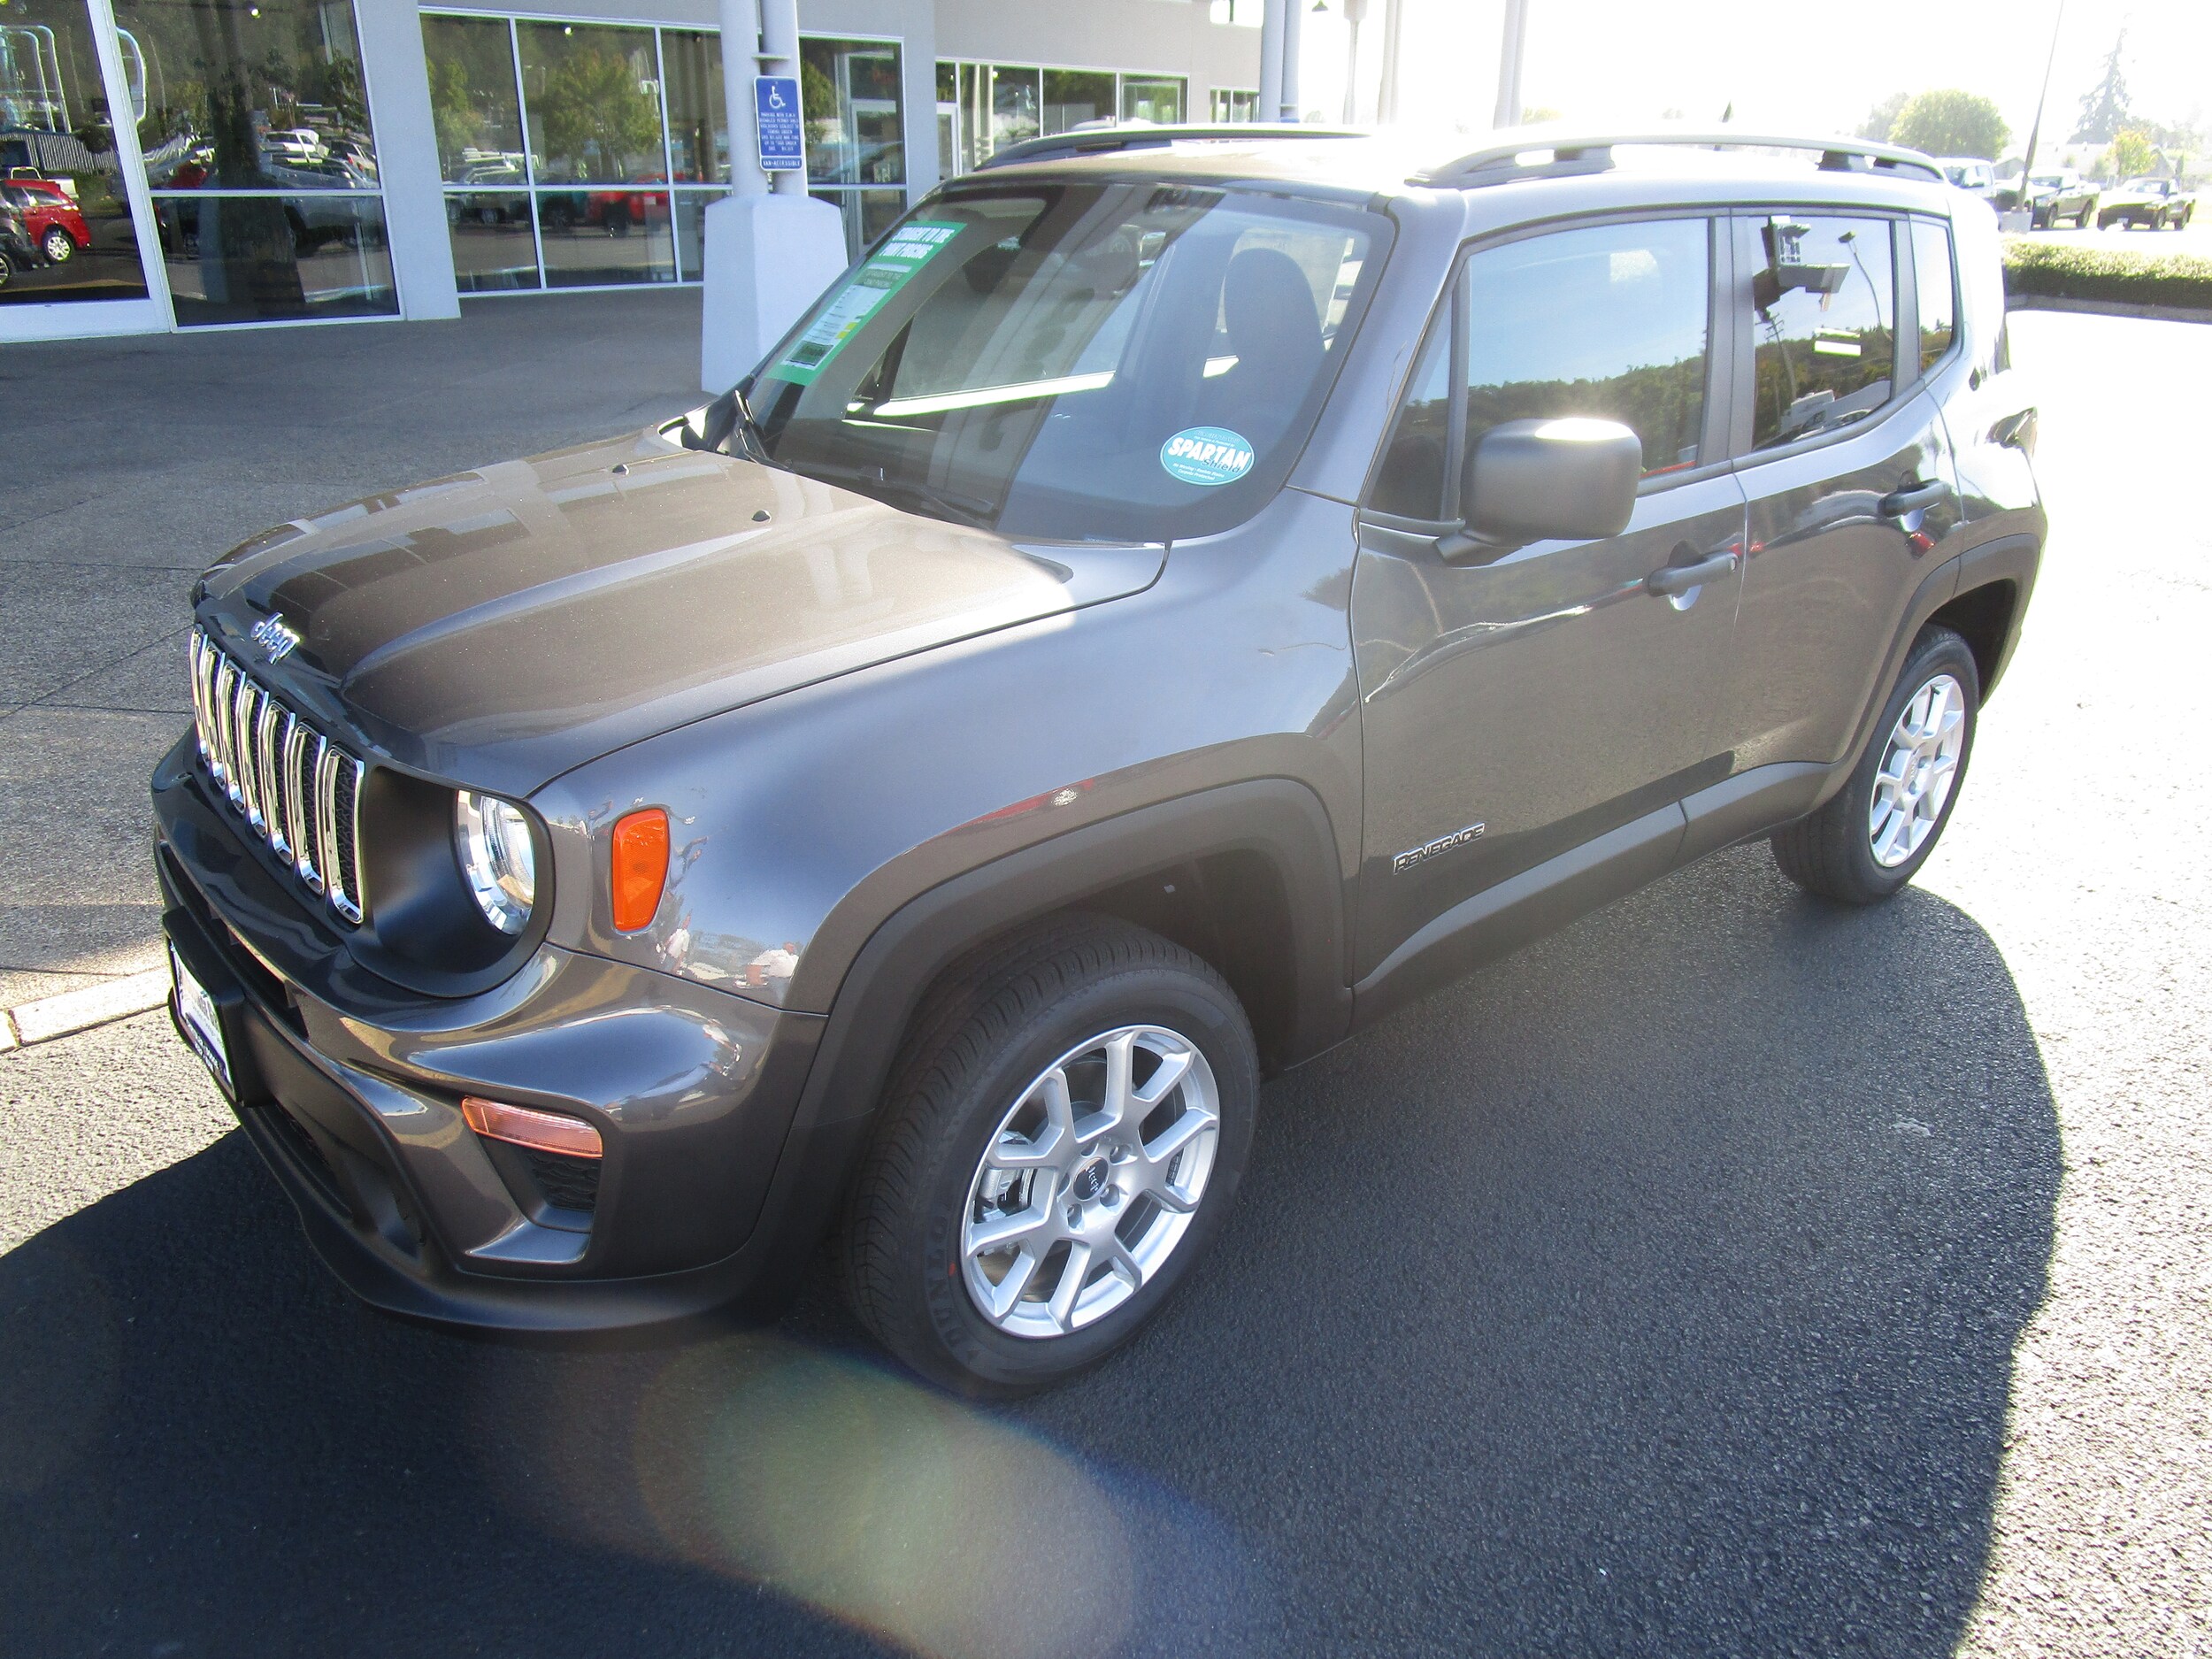 New 2019 Jeep Renegade For Sale At Cottage Grove Chrysler Dodge